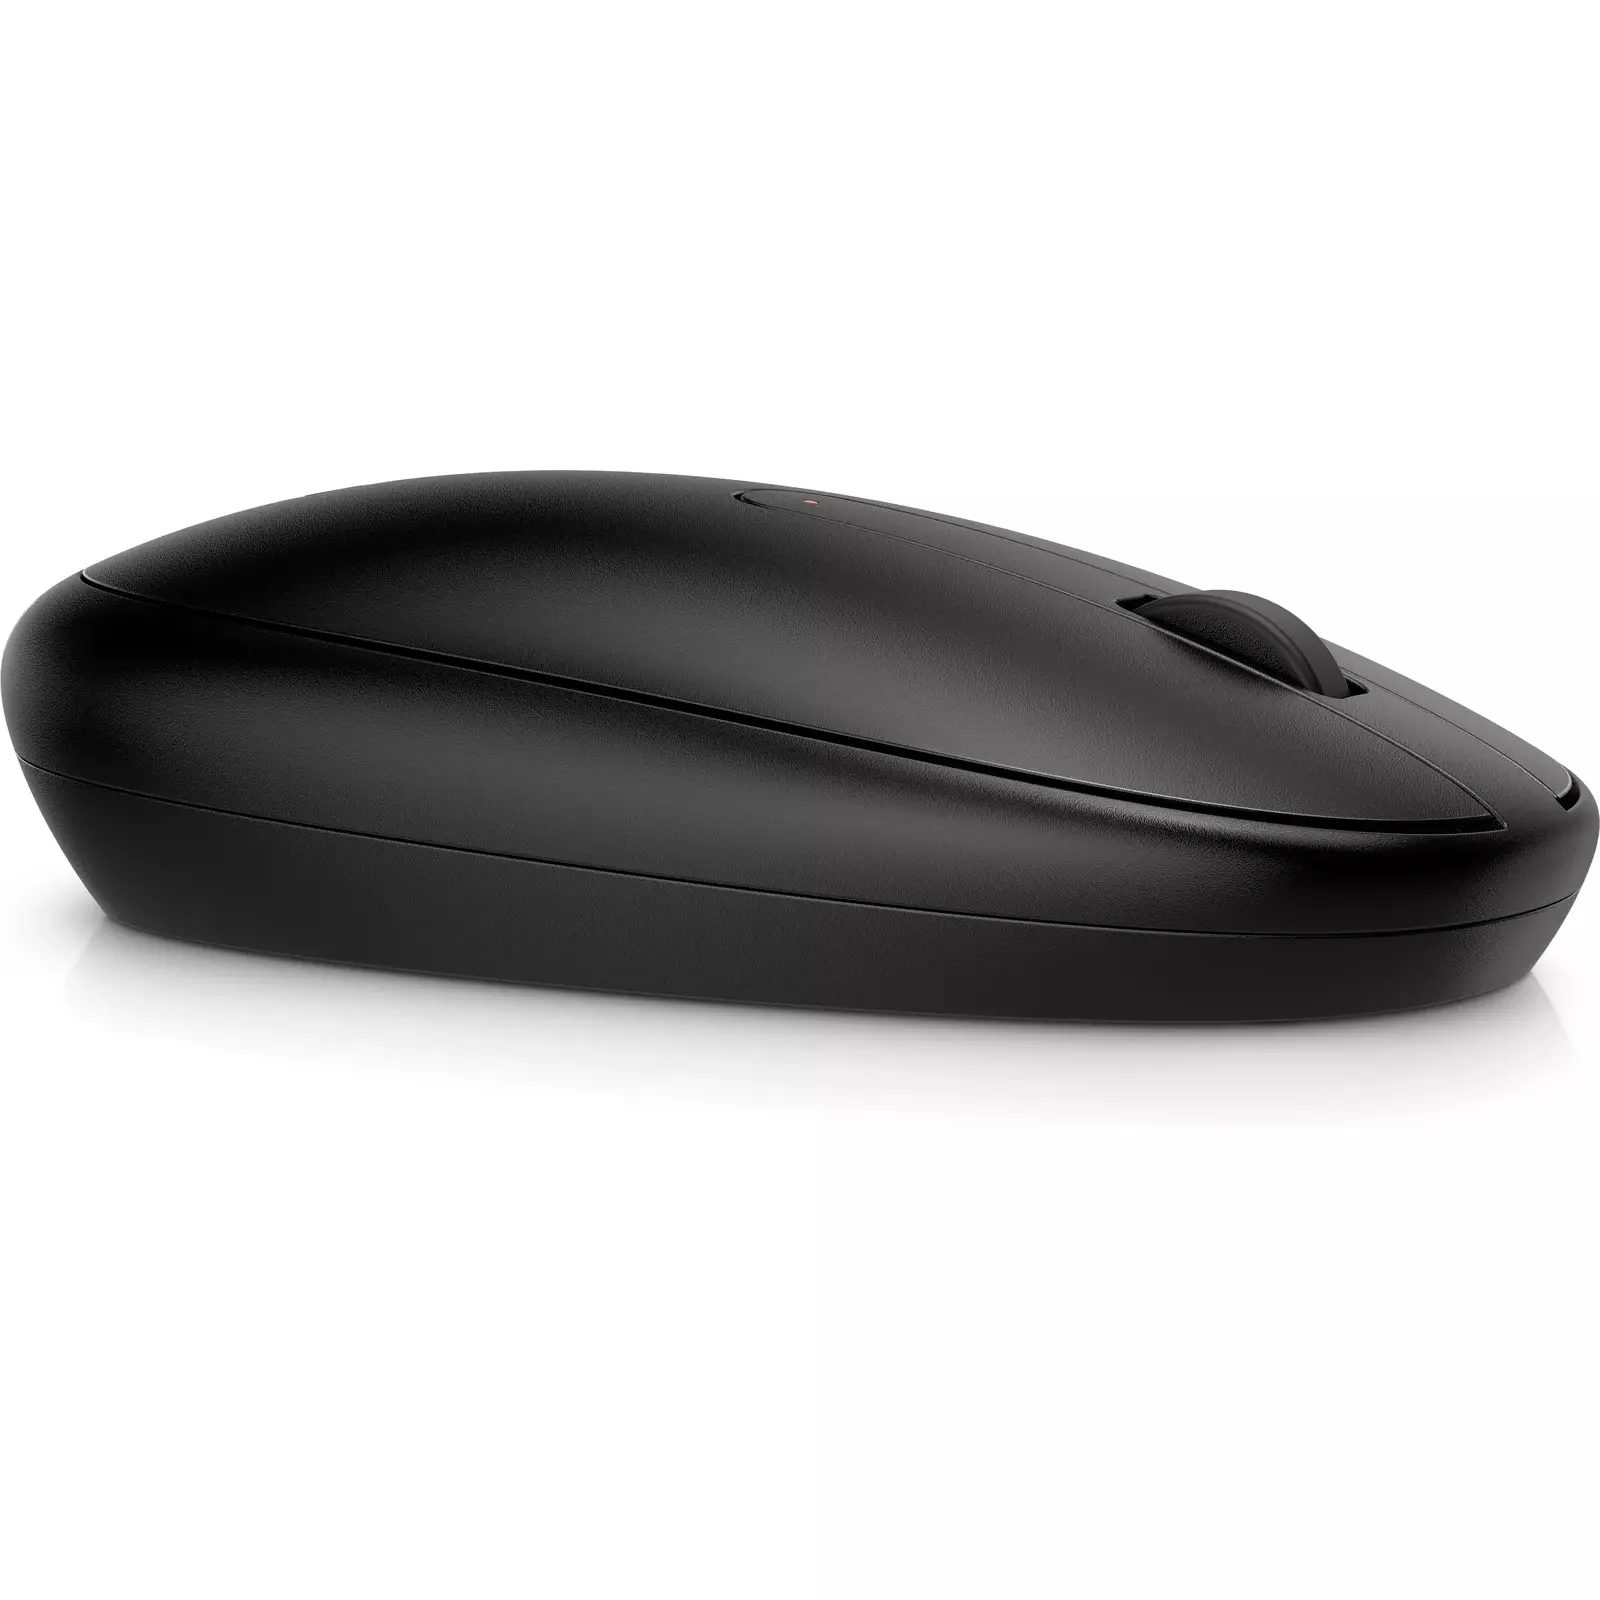  HP 240 Bluetooth® Mouse, Lock On with Bluetooth® 5.1 Wireless  connectivity, Super Accurate Tracking at 1600 DPI, Sleek ambidextrous  Design with Three Buttons and a Scroll Wheel (3V0G9AA),Black : Electronics